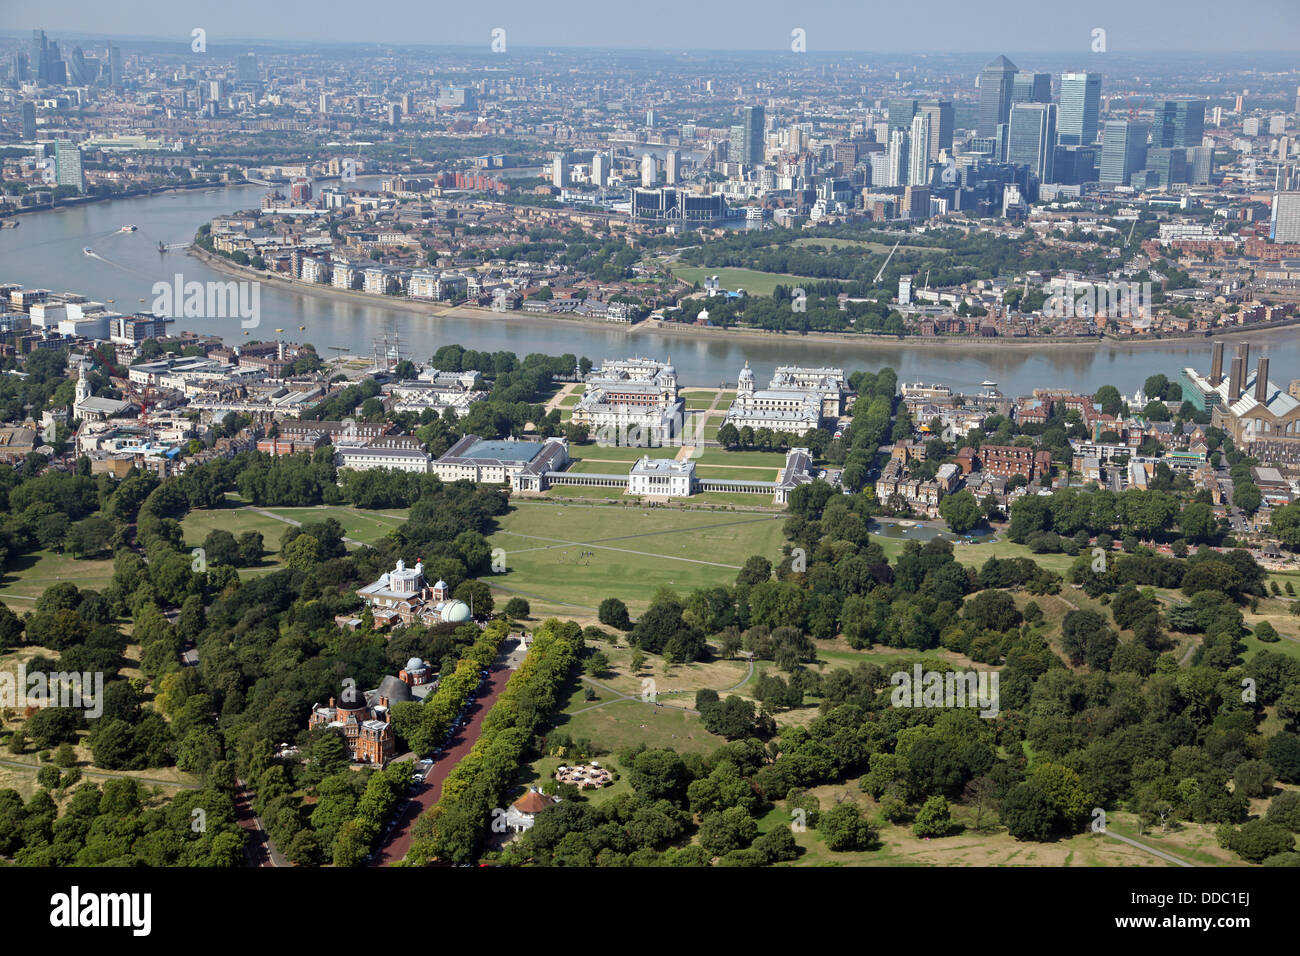 Luftaufnahme des Greenwich Park, Themse, Isle of Dogs und Canary Wharf in East London Stockfoto